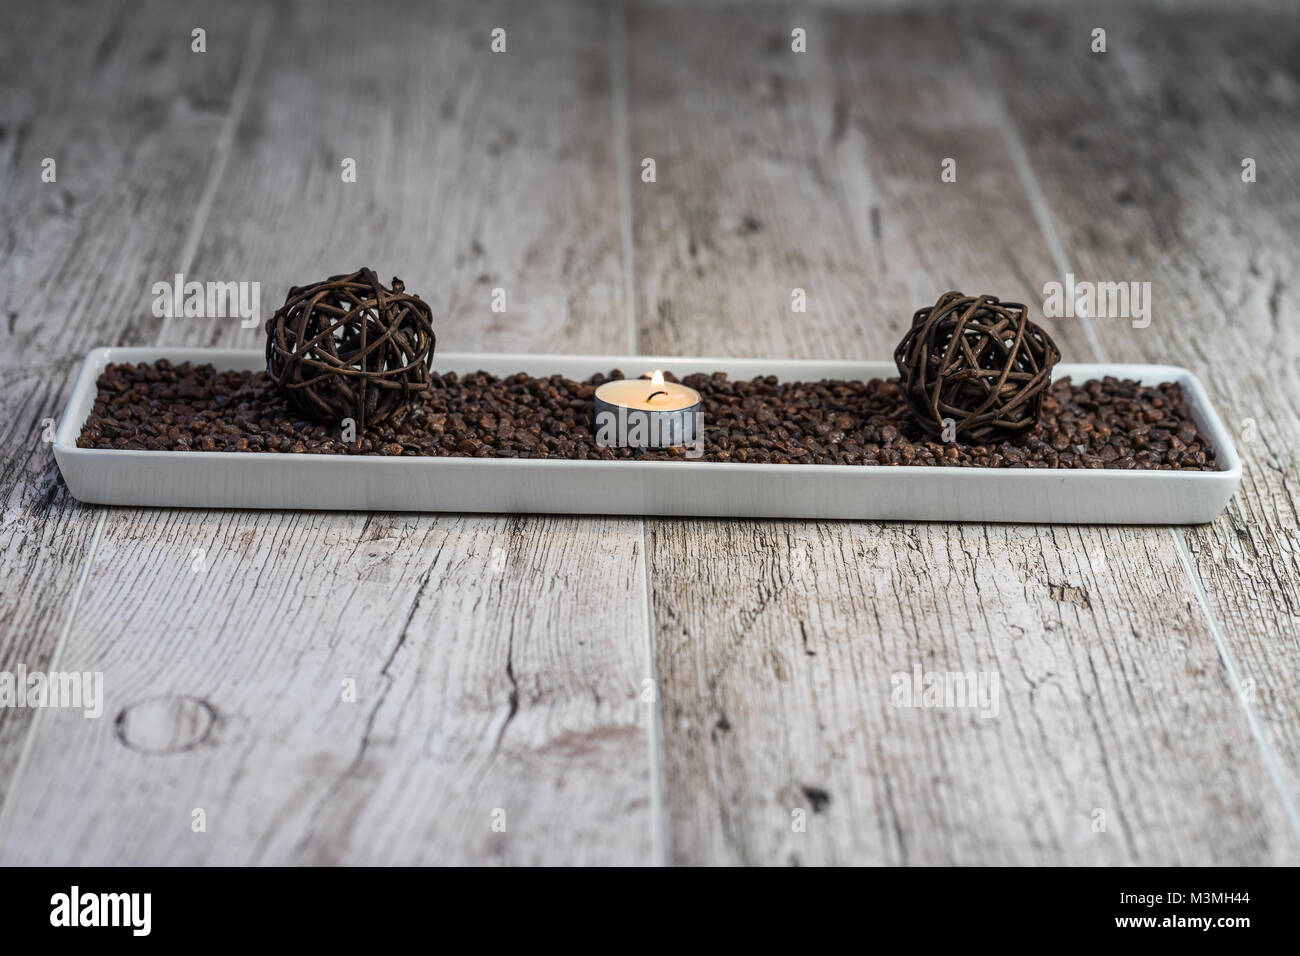 Beautiful and discreet decoration for nice moments on a wooden table. Stock Photo